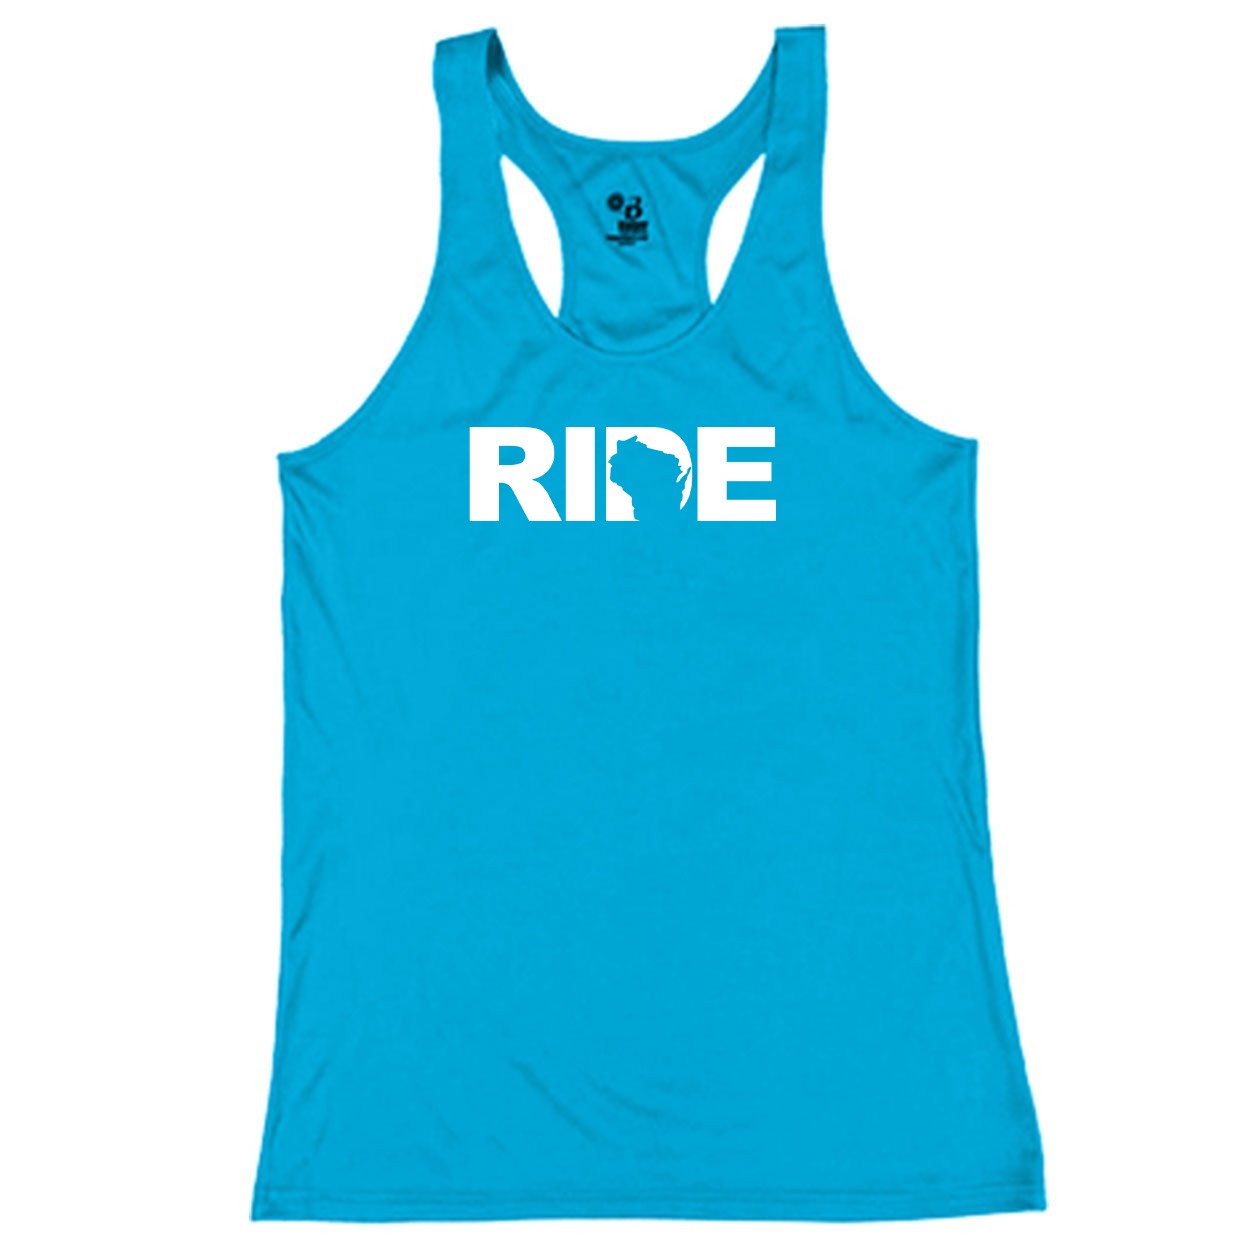 Ride Wisconsin Classic Youth Girls Performance Racerback Tank Top Electric Blue (White Logo)